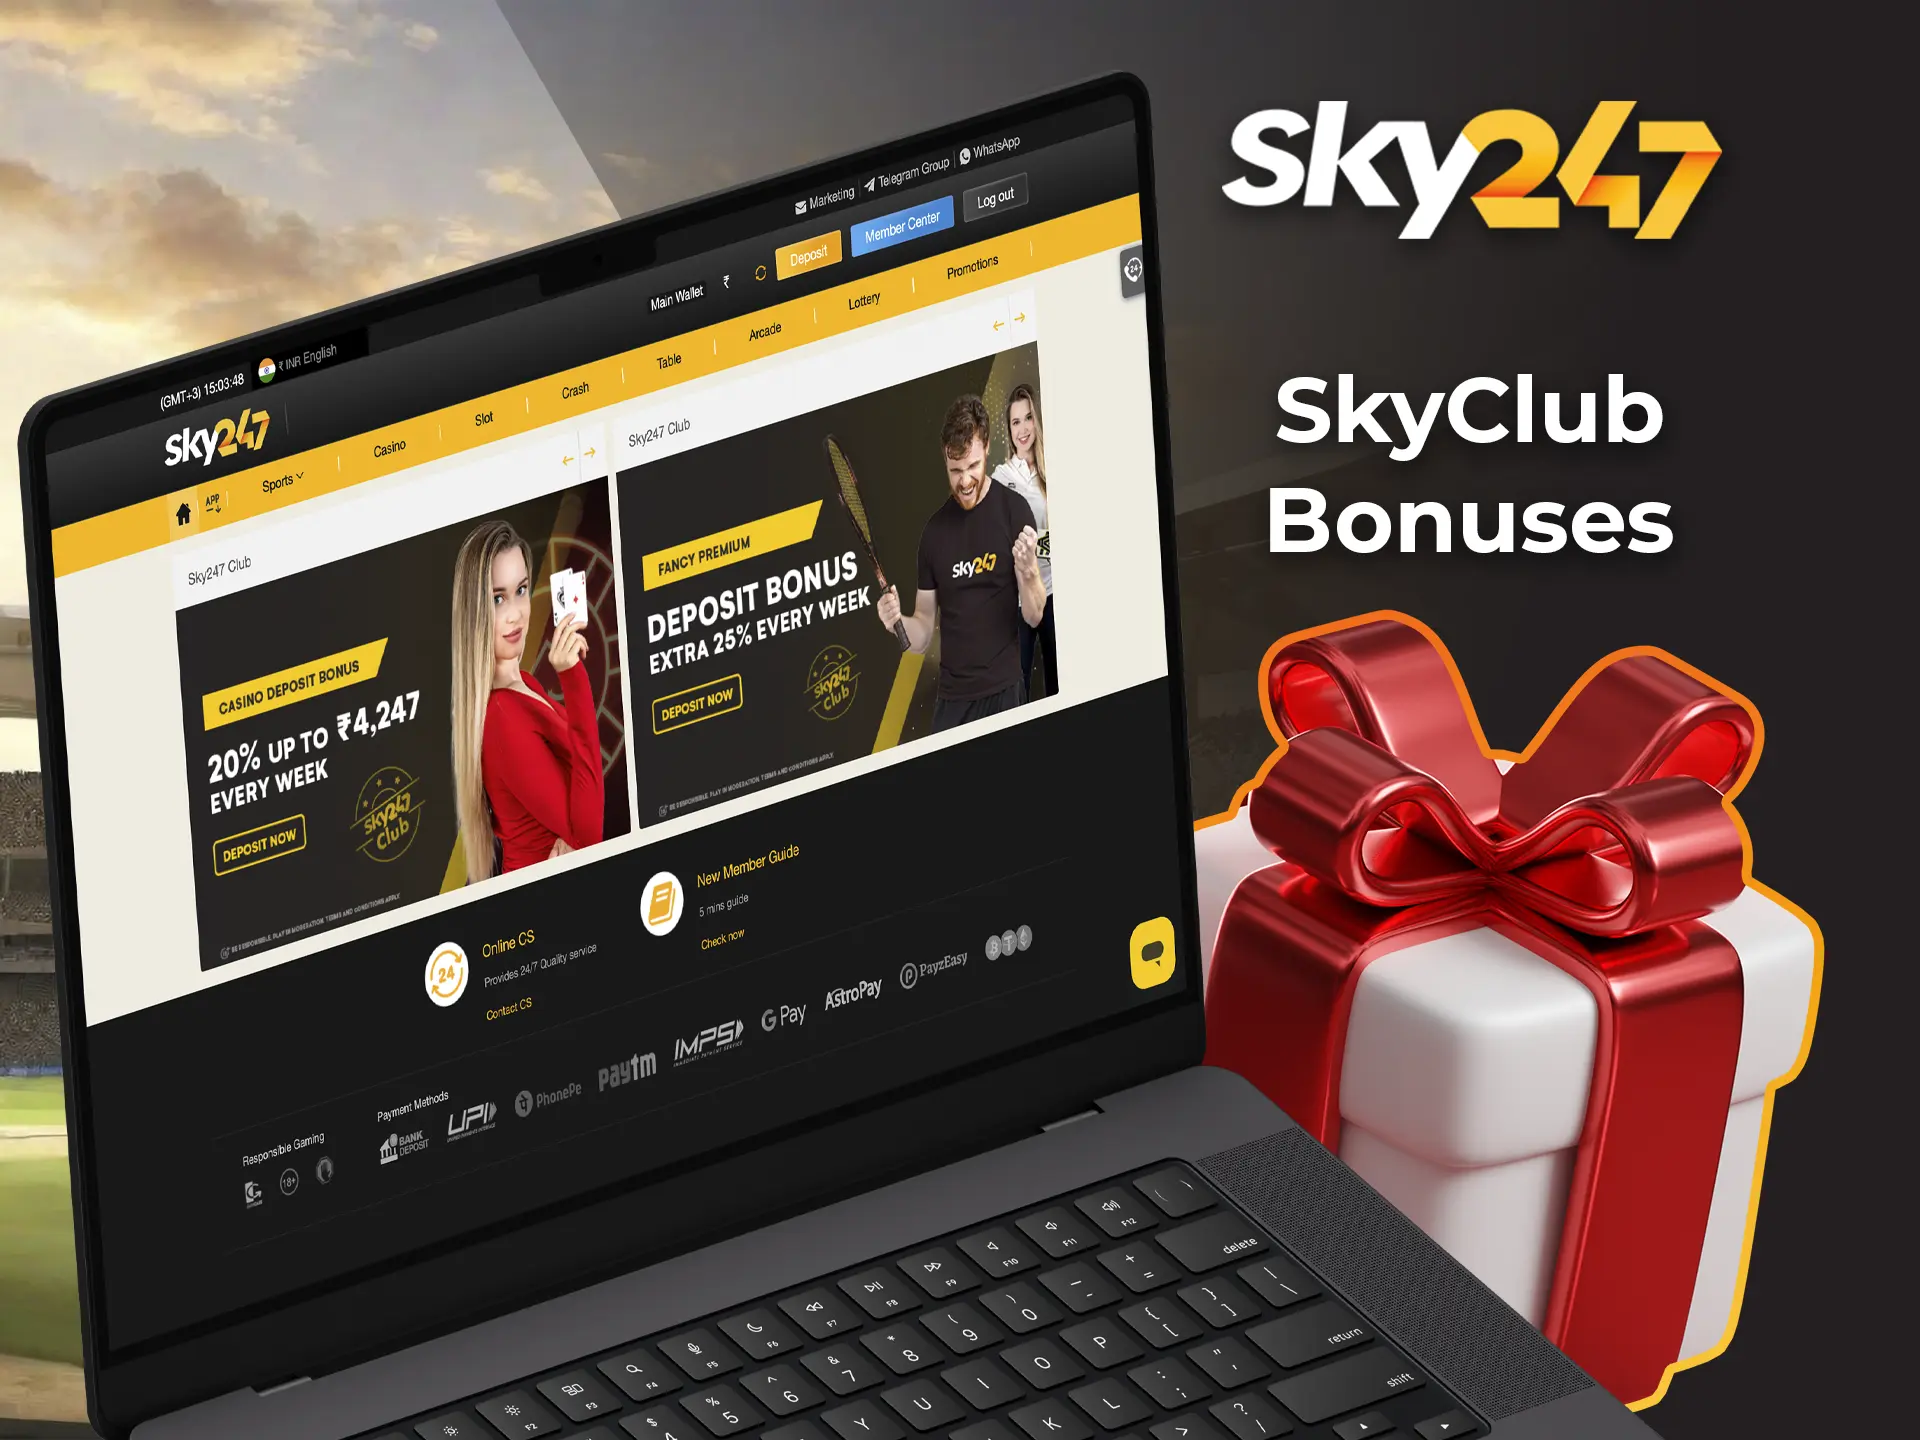 Join the Sky247 club upgrade your account and get big gifts from the casino.